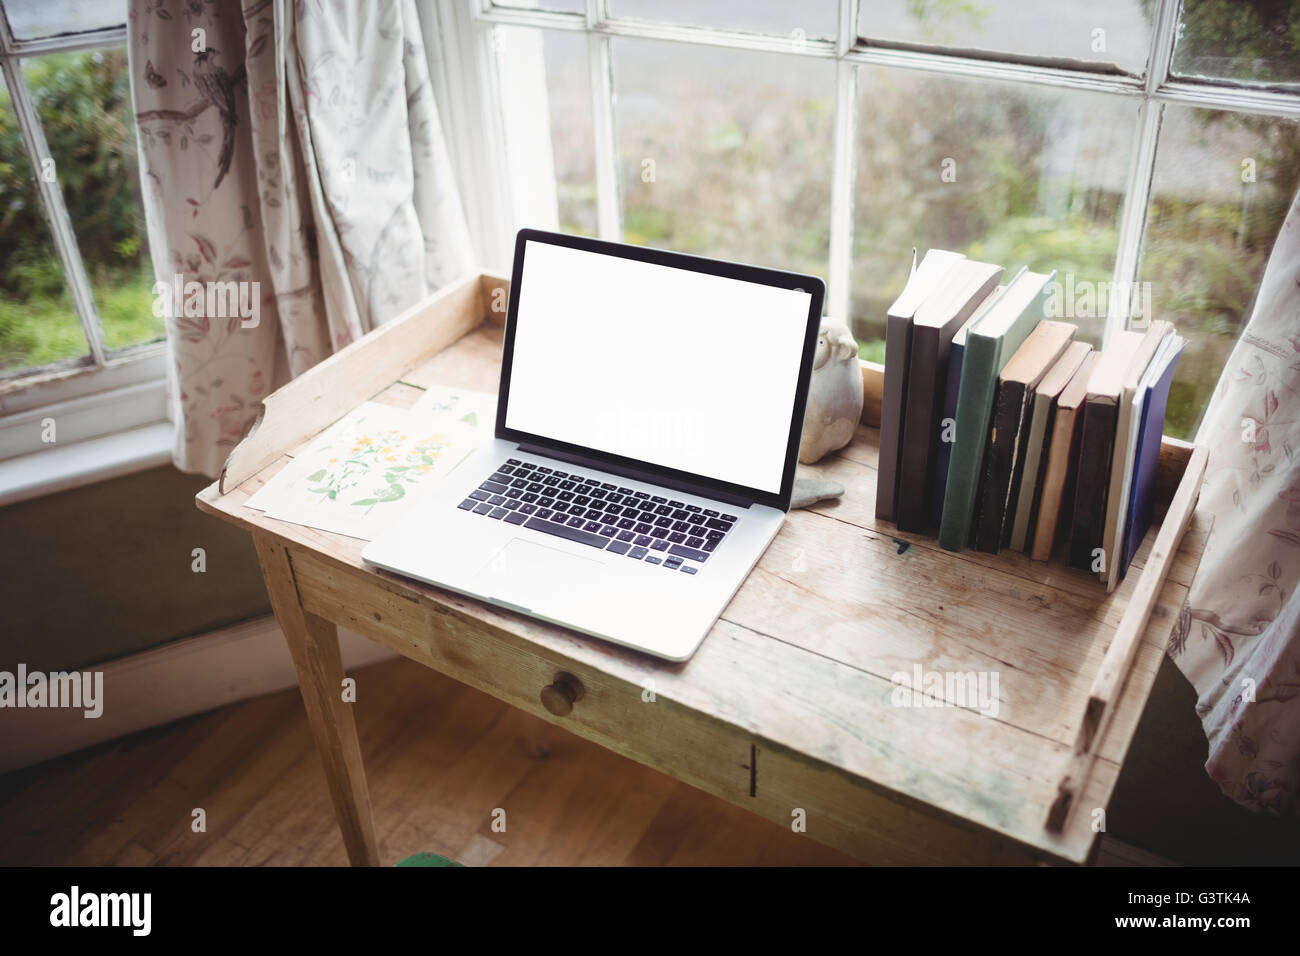 Close up view of wooden desk and laptop Stock Photo